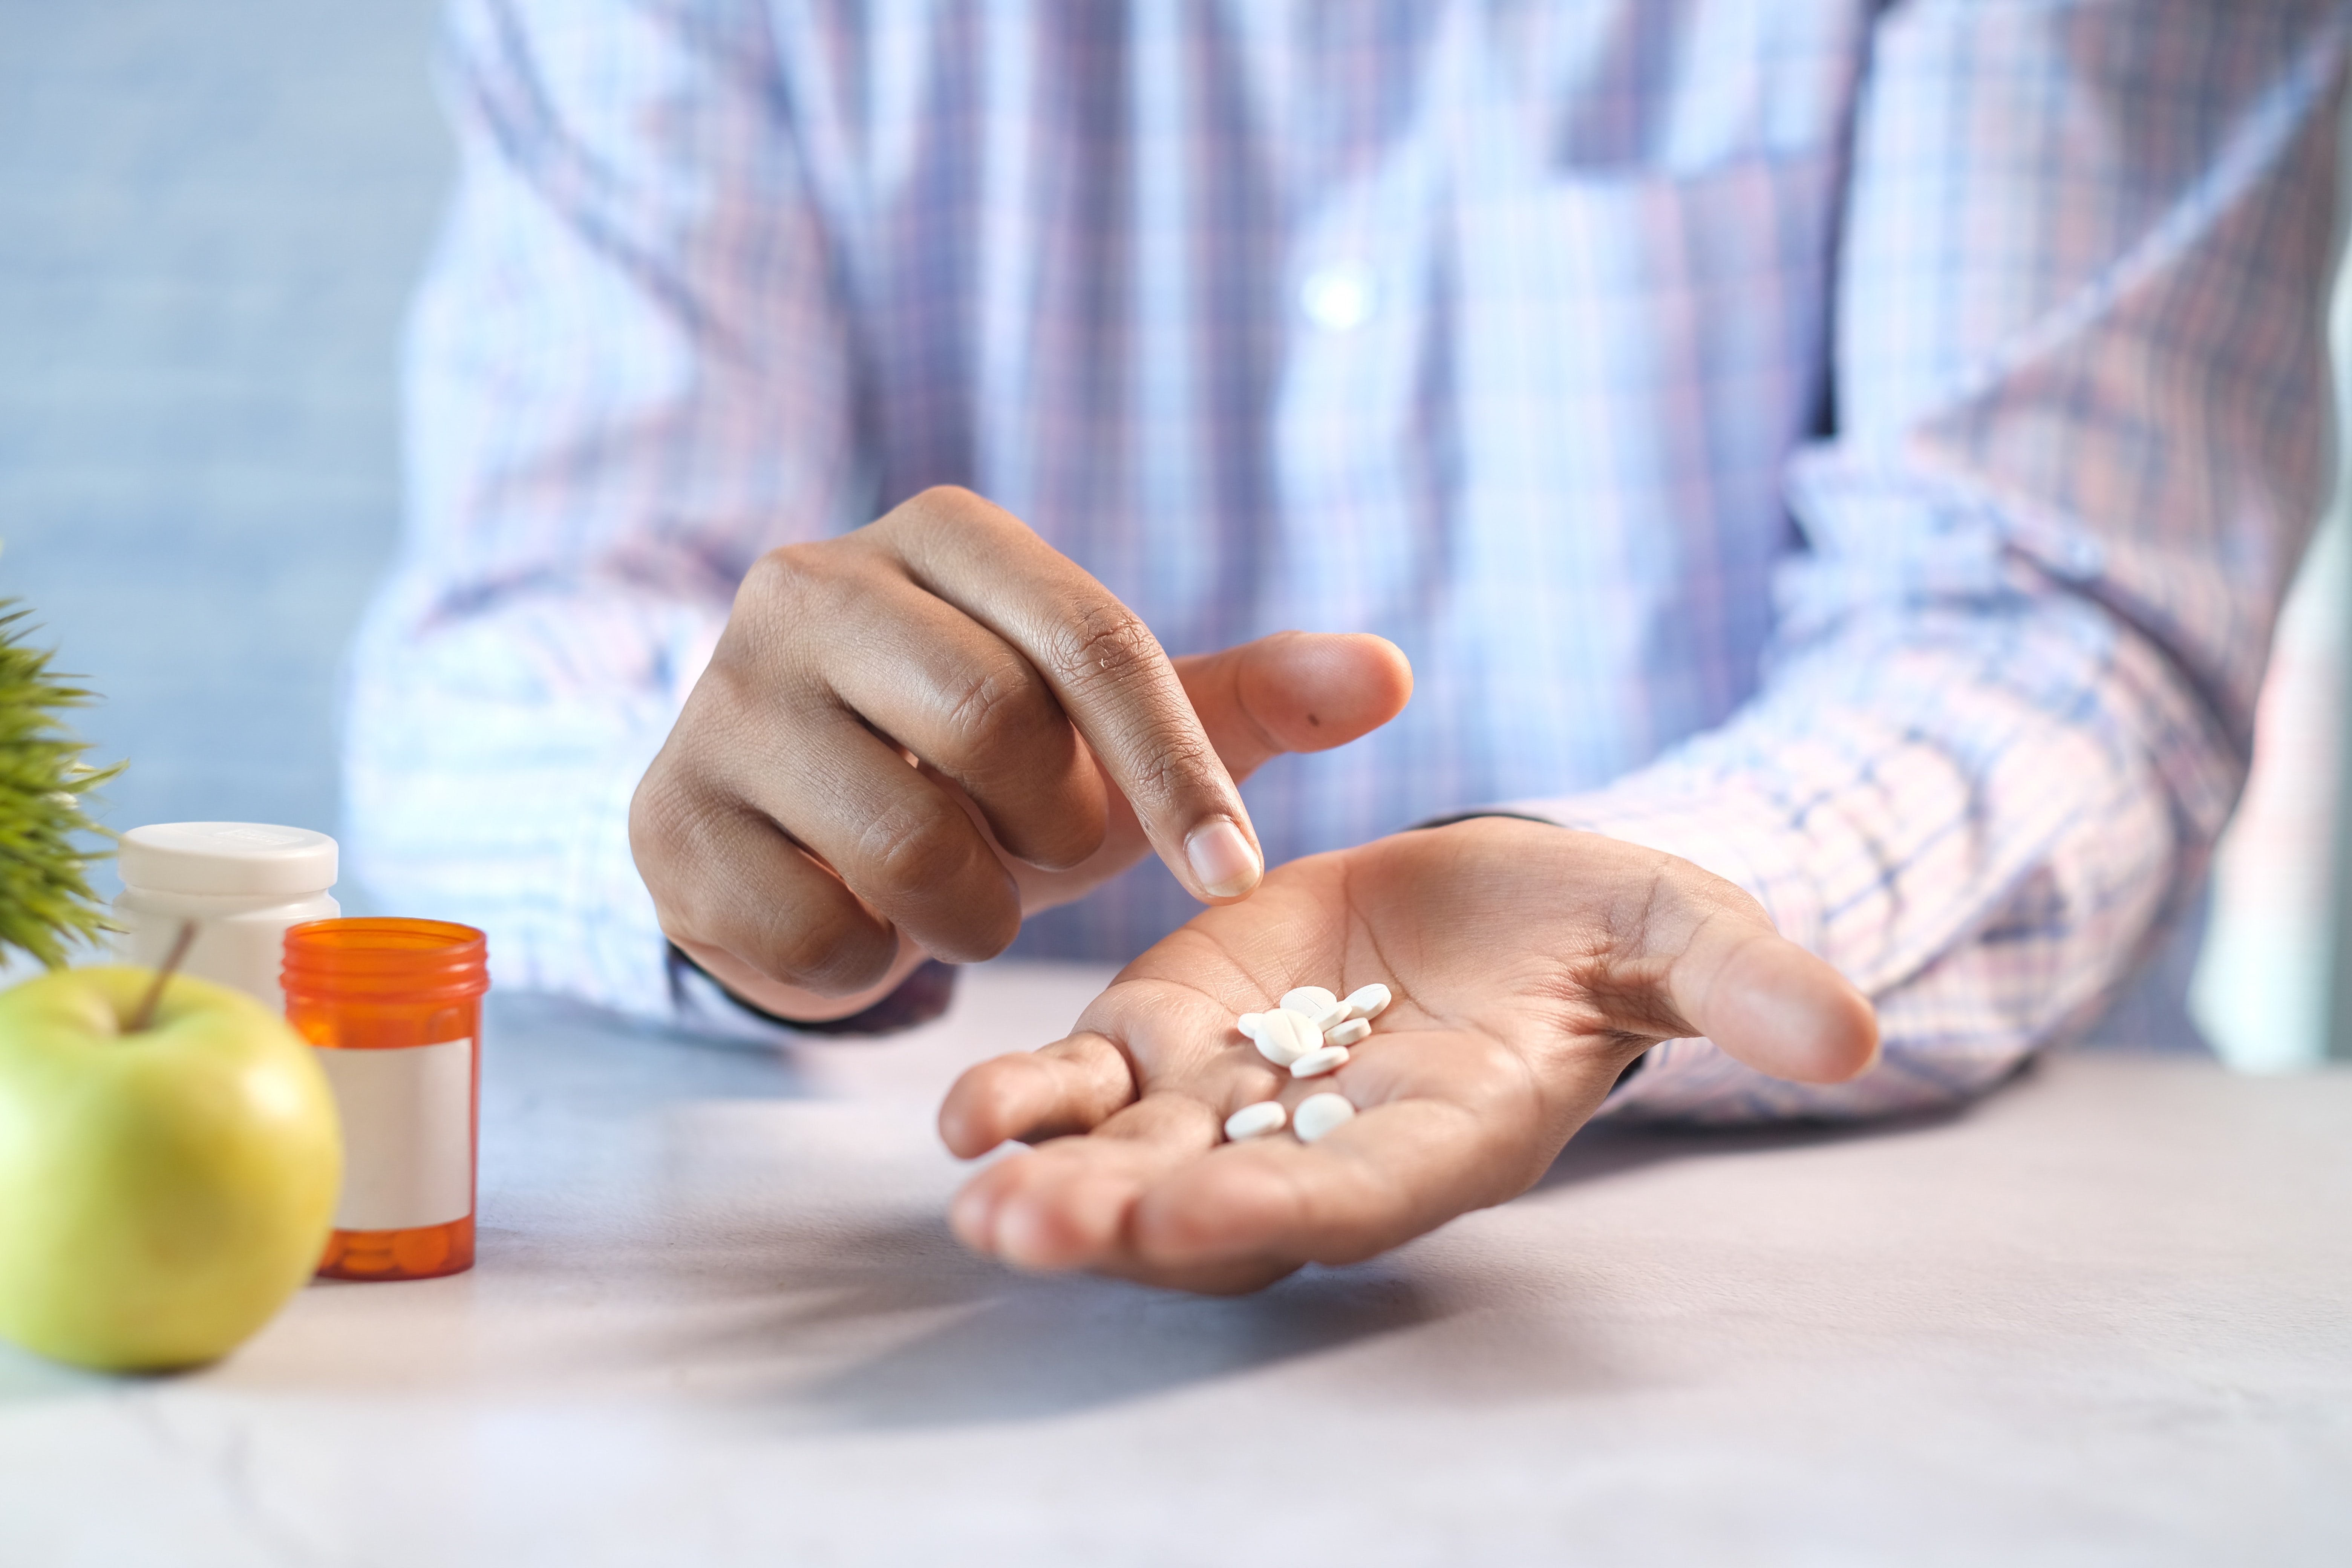 Man holding several pills in his hand